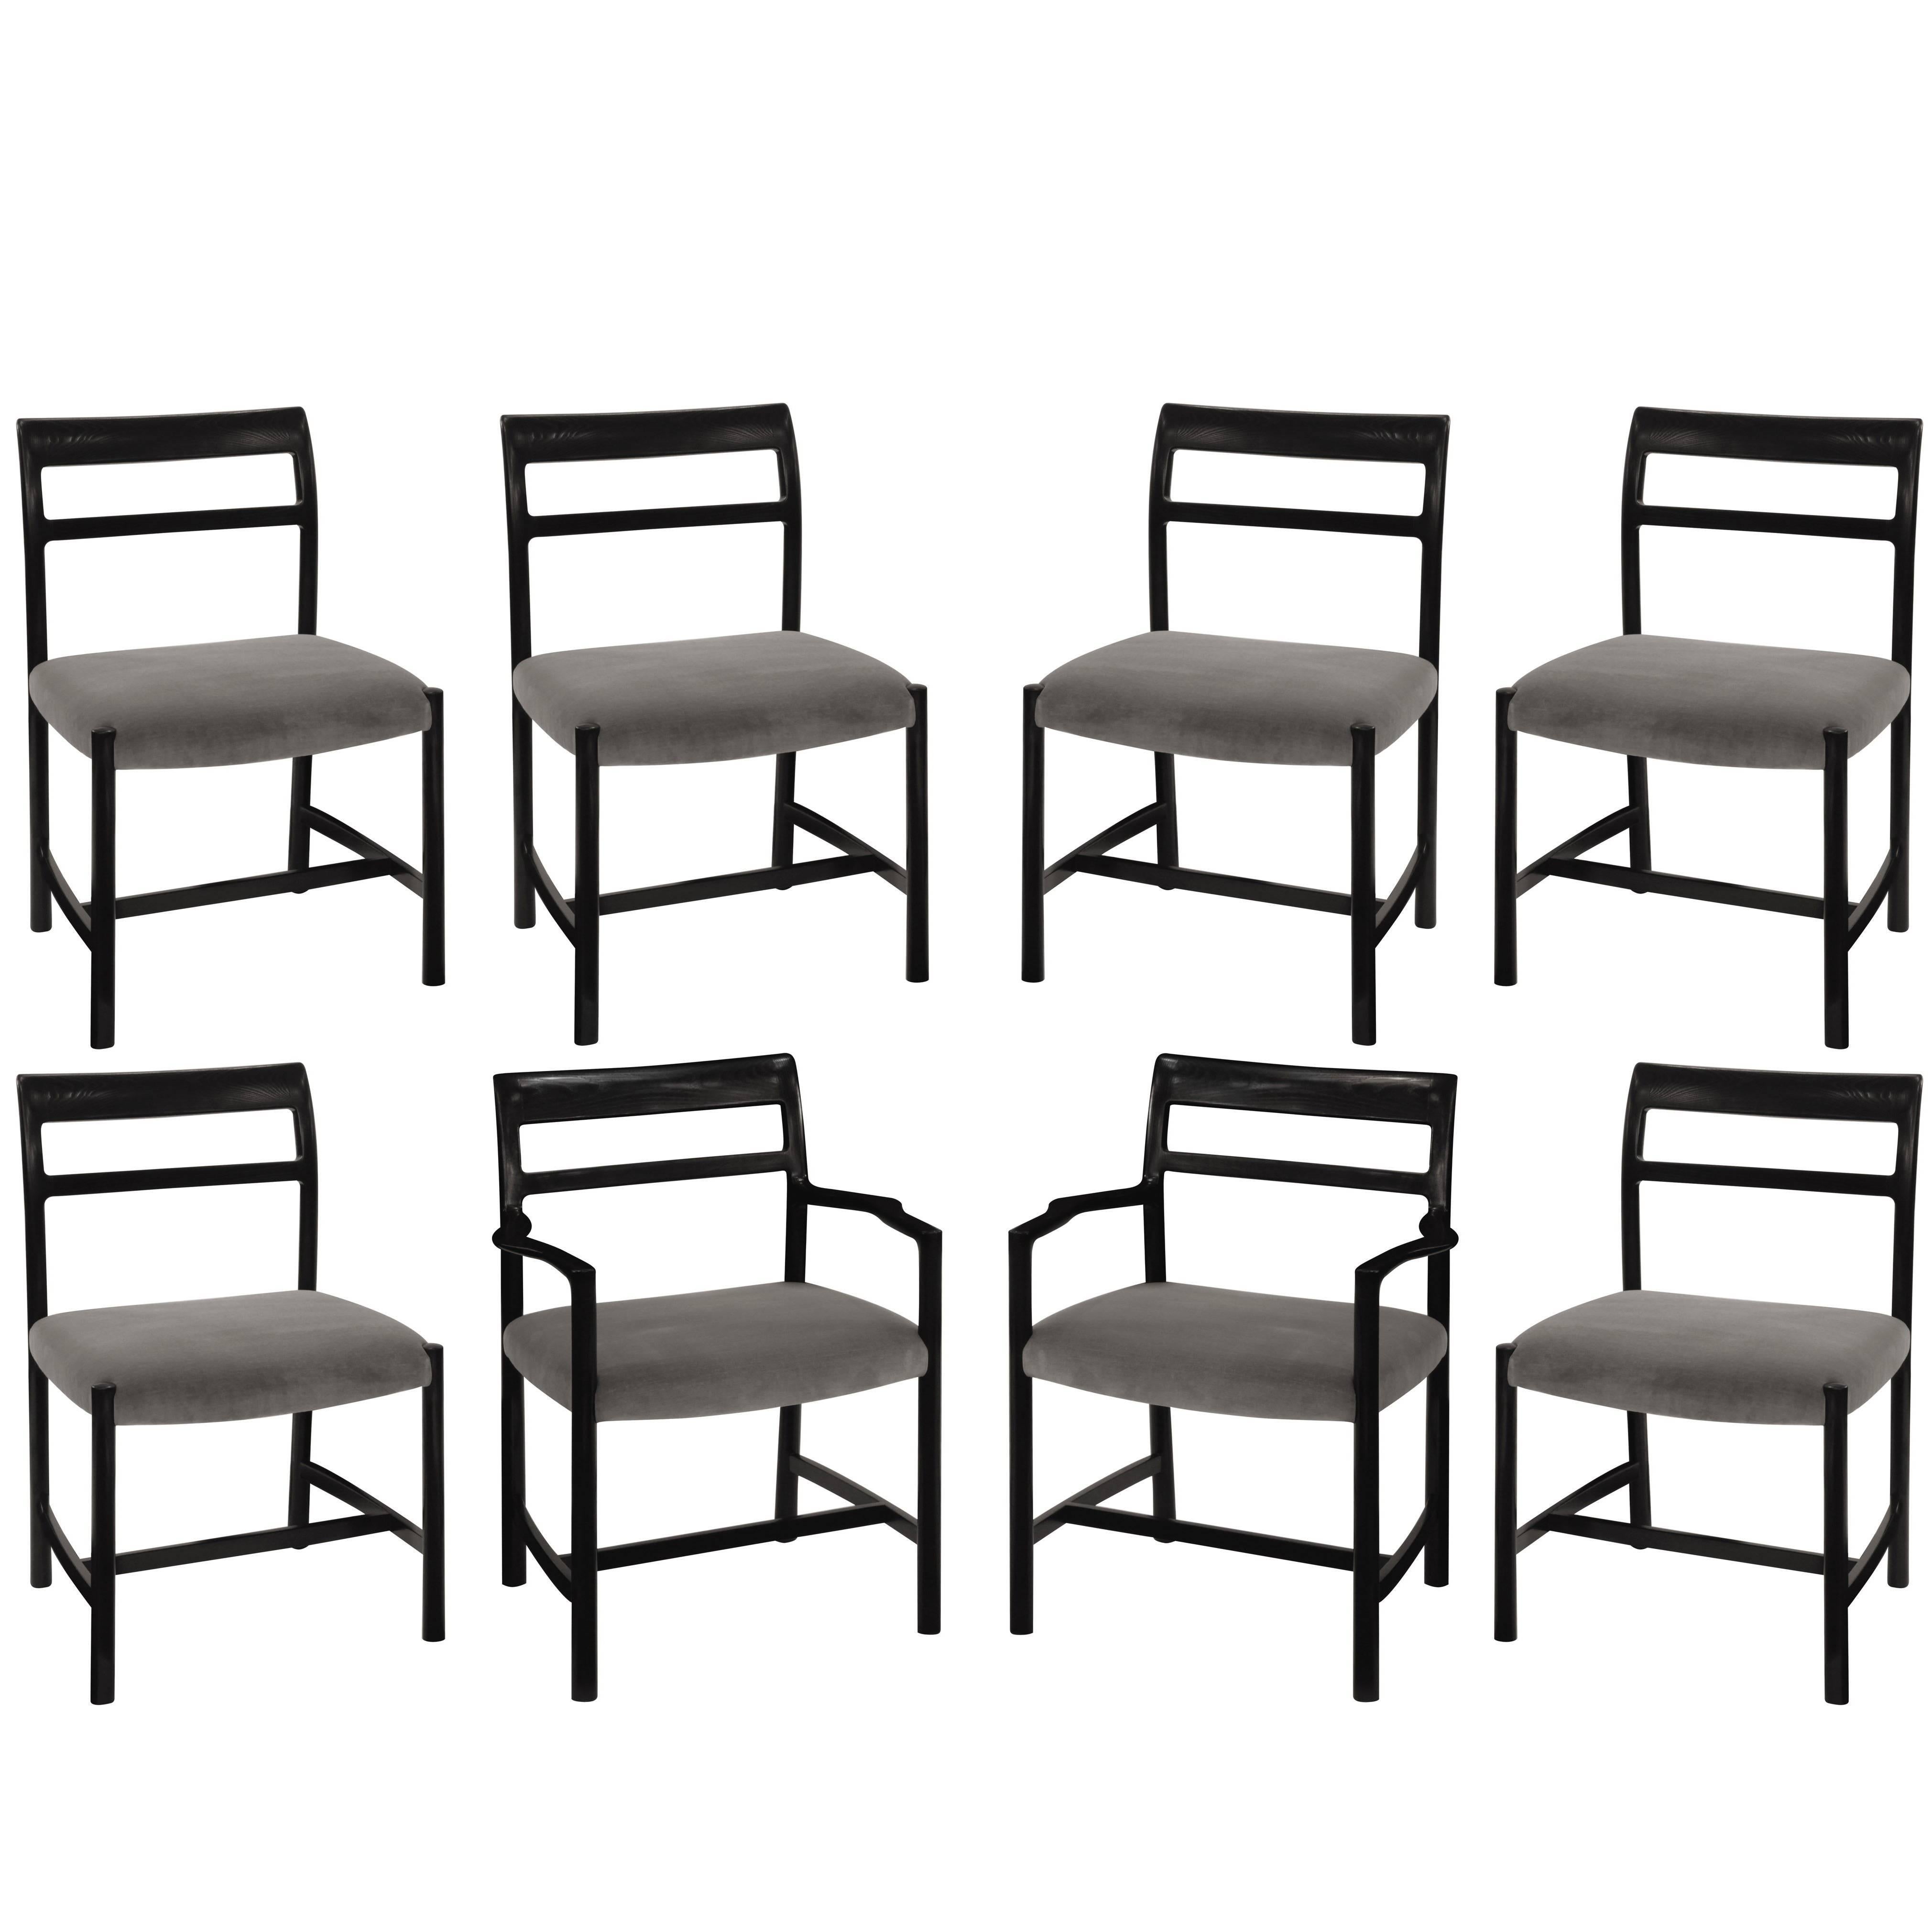 Roger Sprunger Set of Eight Dining Chairs, 1967